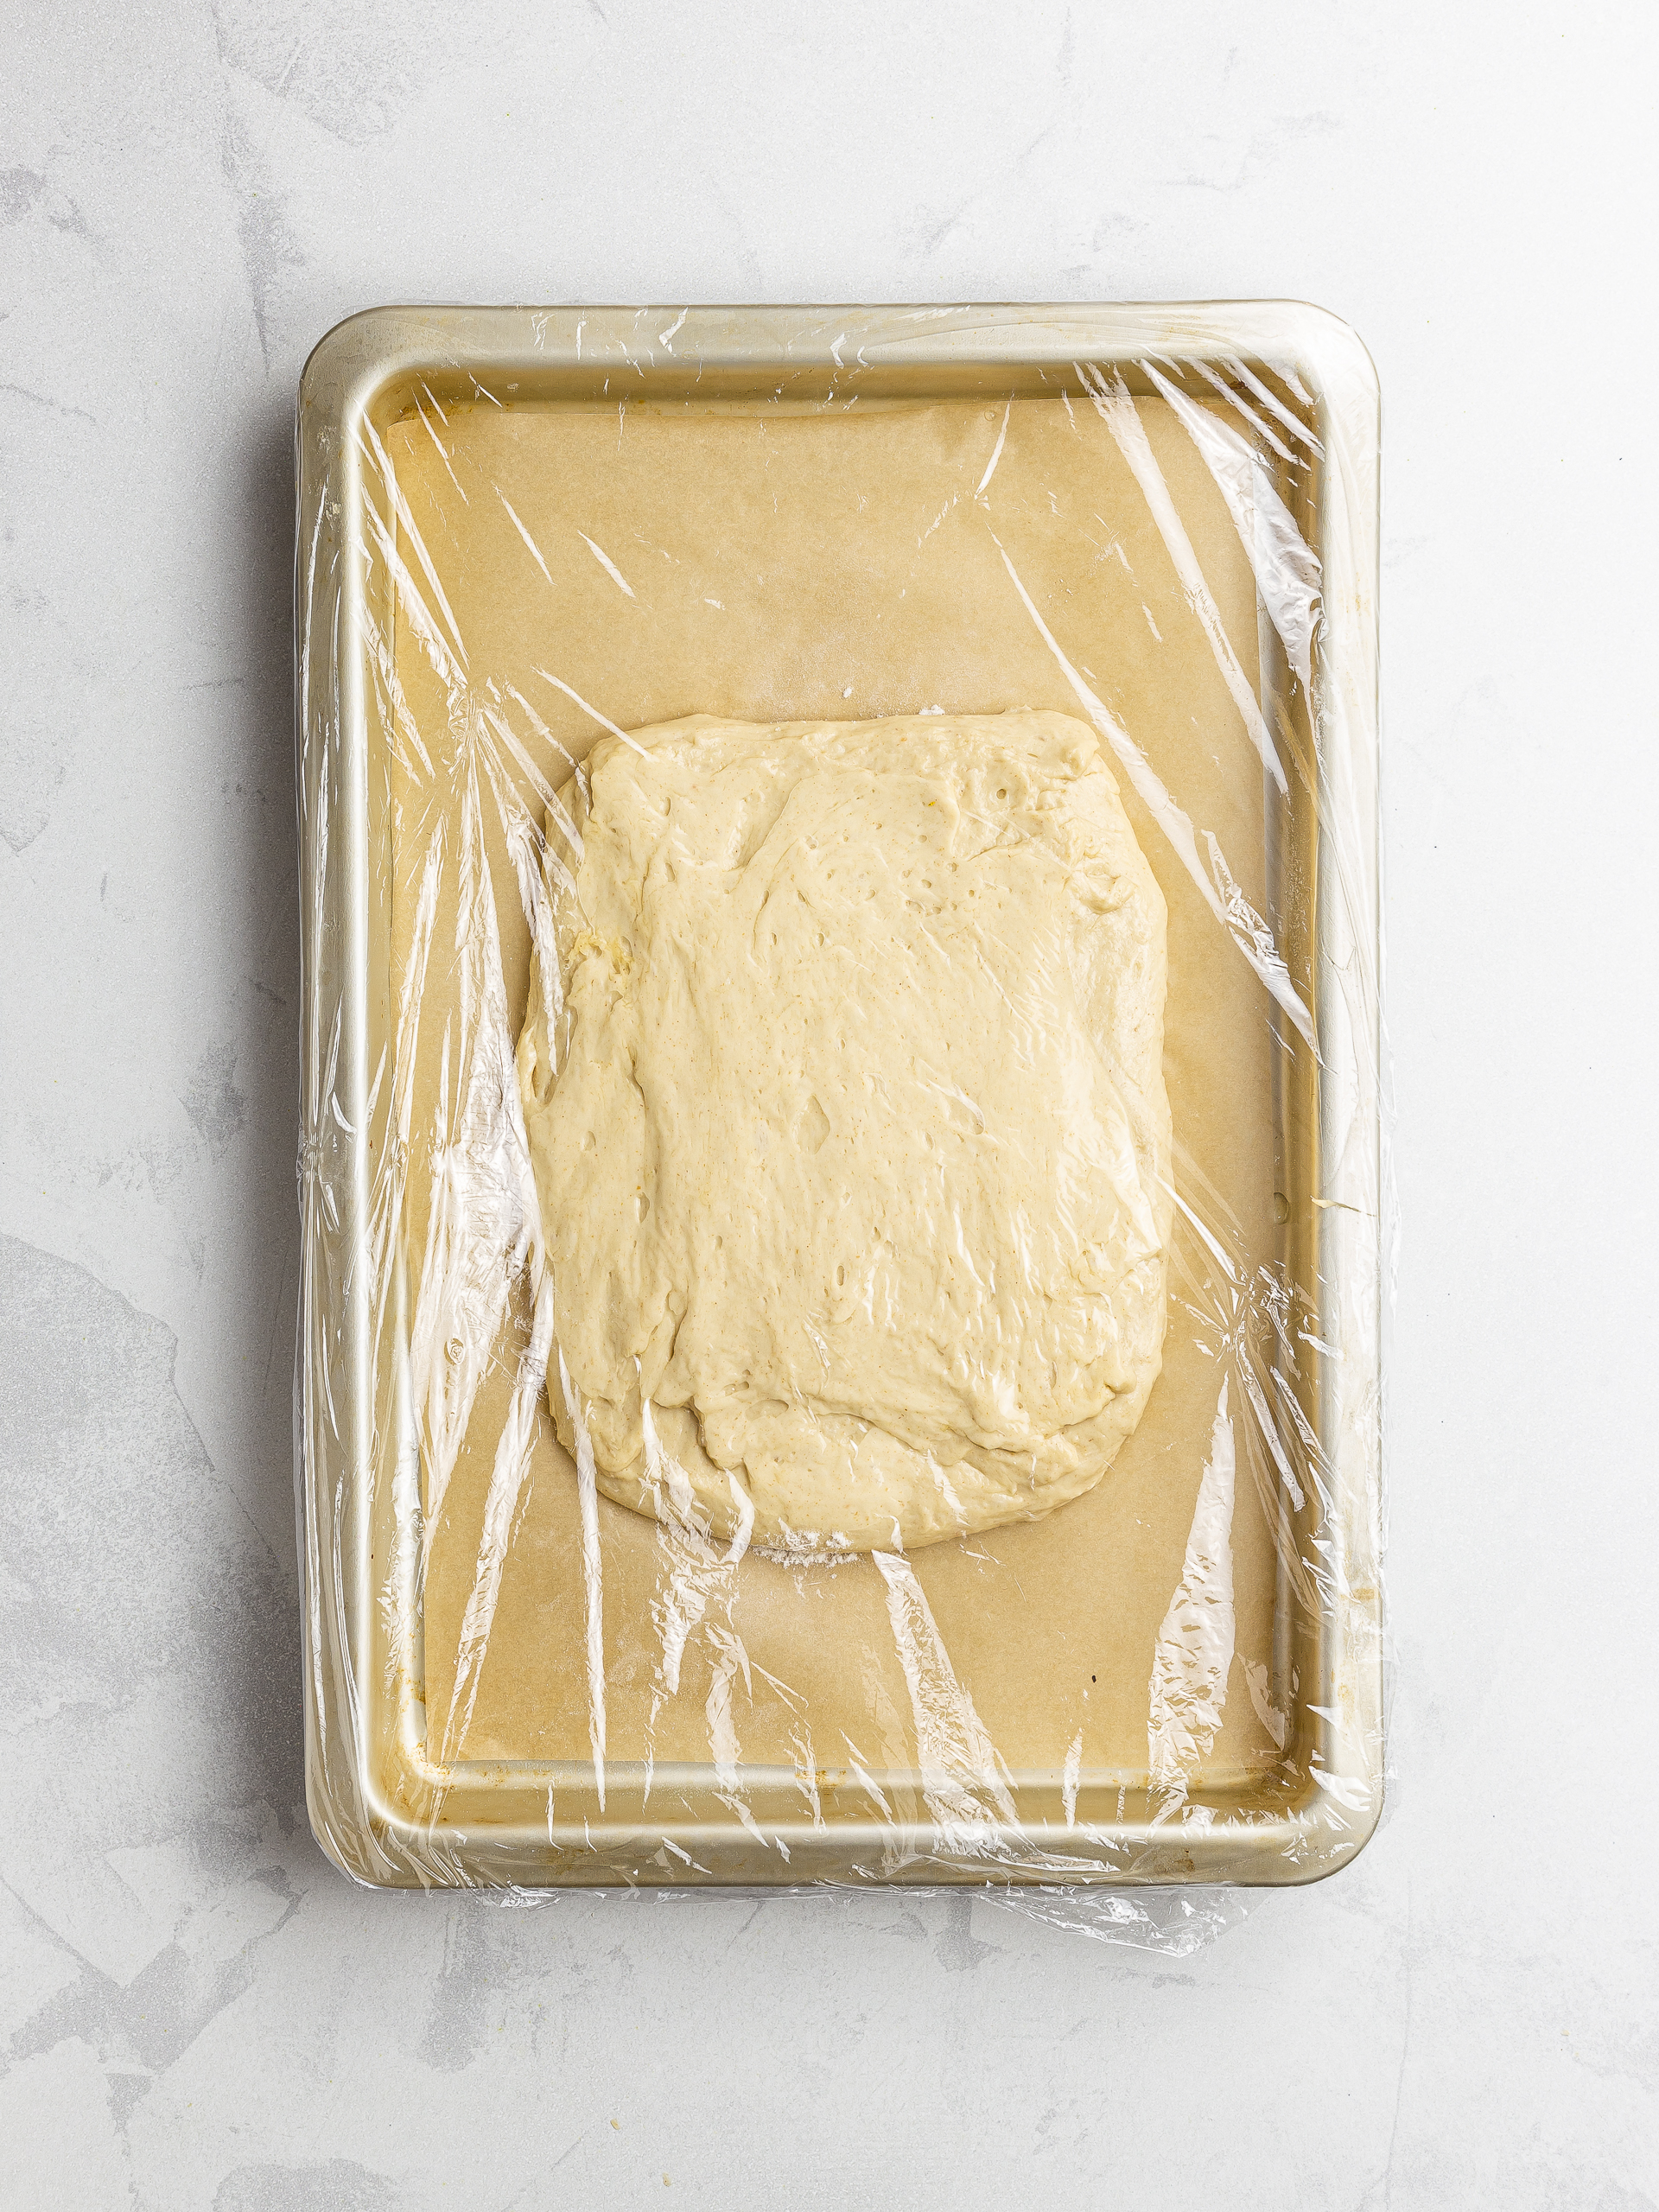 vegan pastry dough on a tray